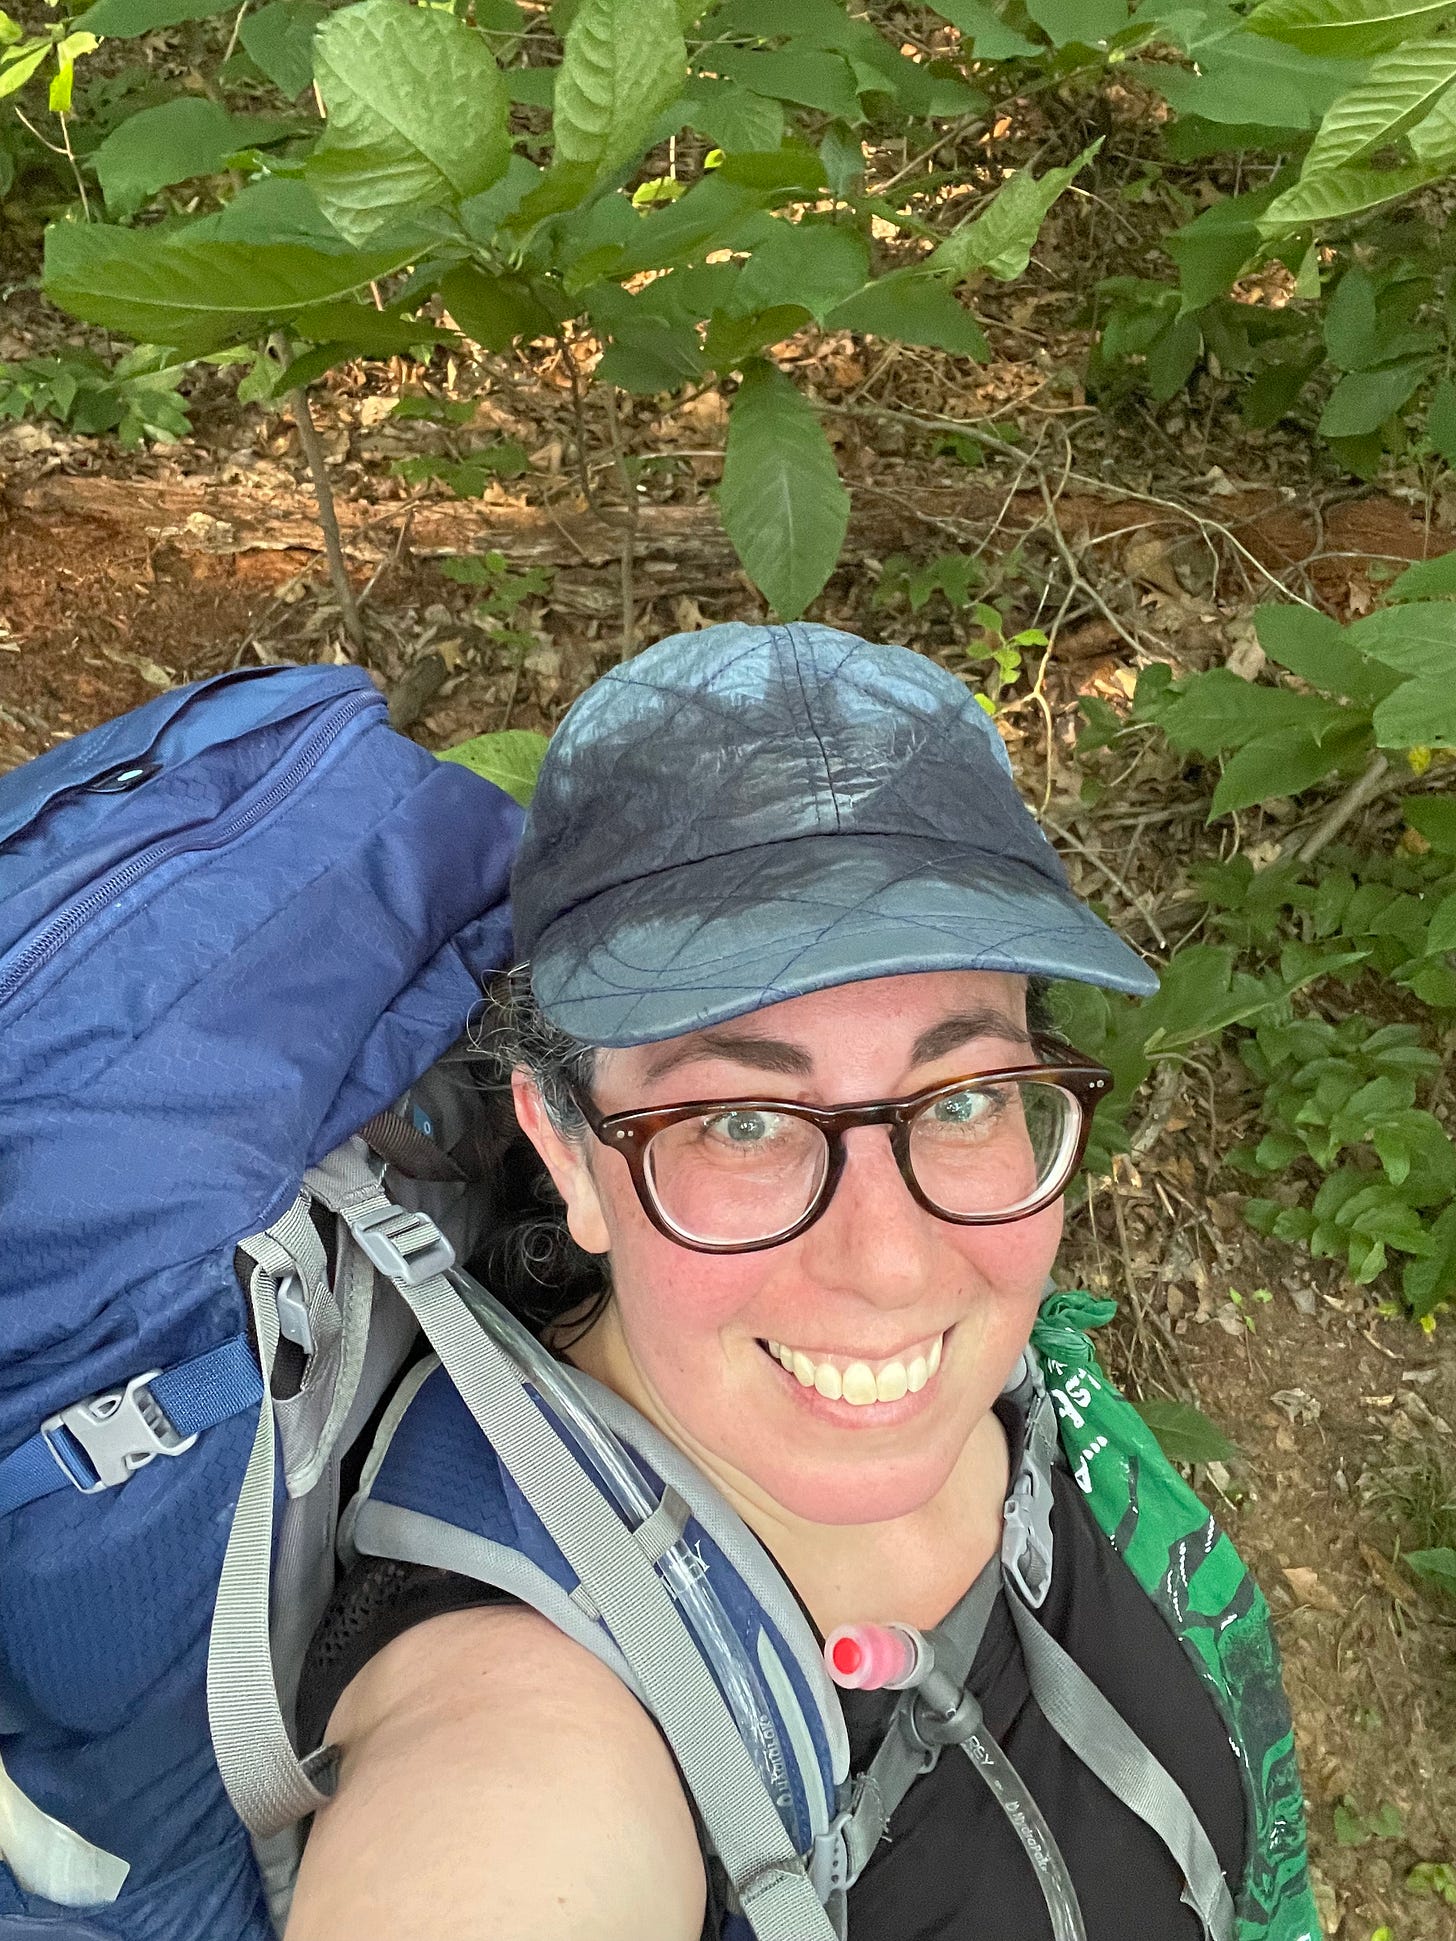 Selfie of a middle-aged white woman with brown glasses and a sweaty blue hat looking at the camera. She is wearing a large blue backpack. Green foliage in background